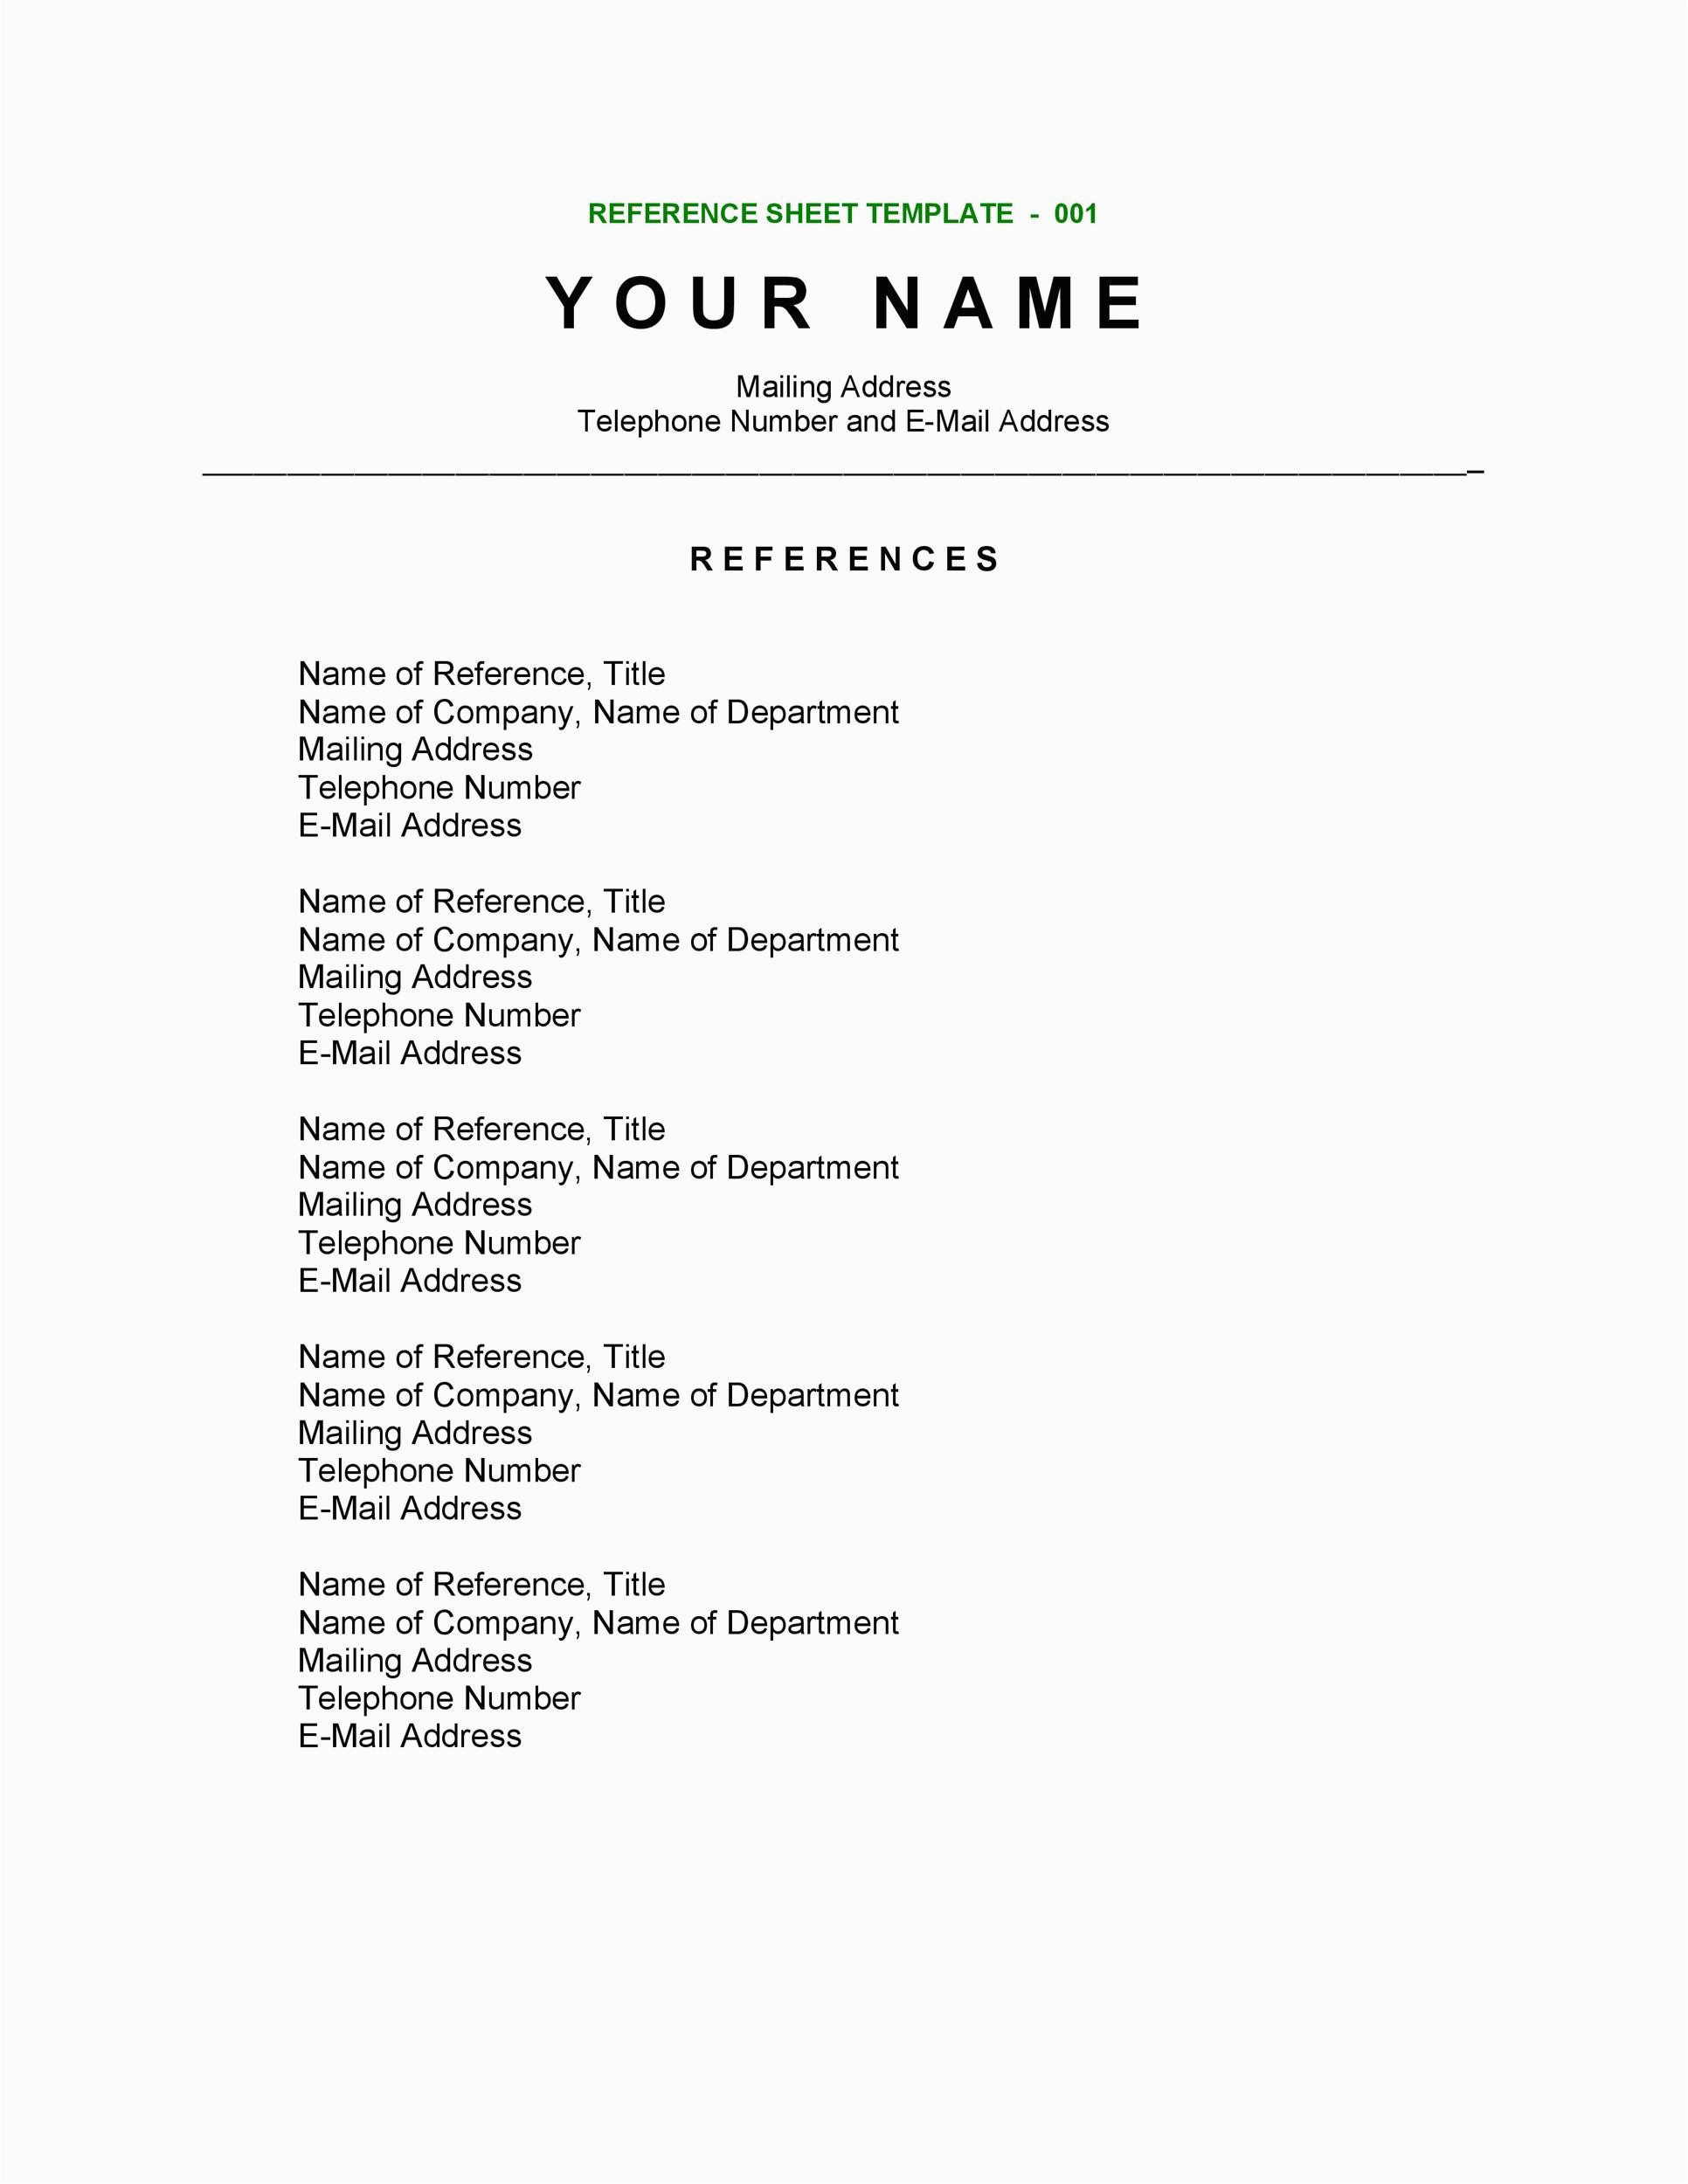 Free Reference List Template for Resume 40 Professional Reference Page Sheet Templates Templatelab